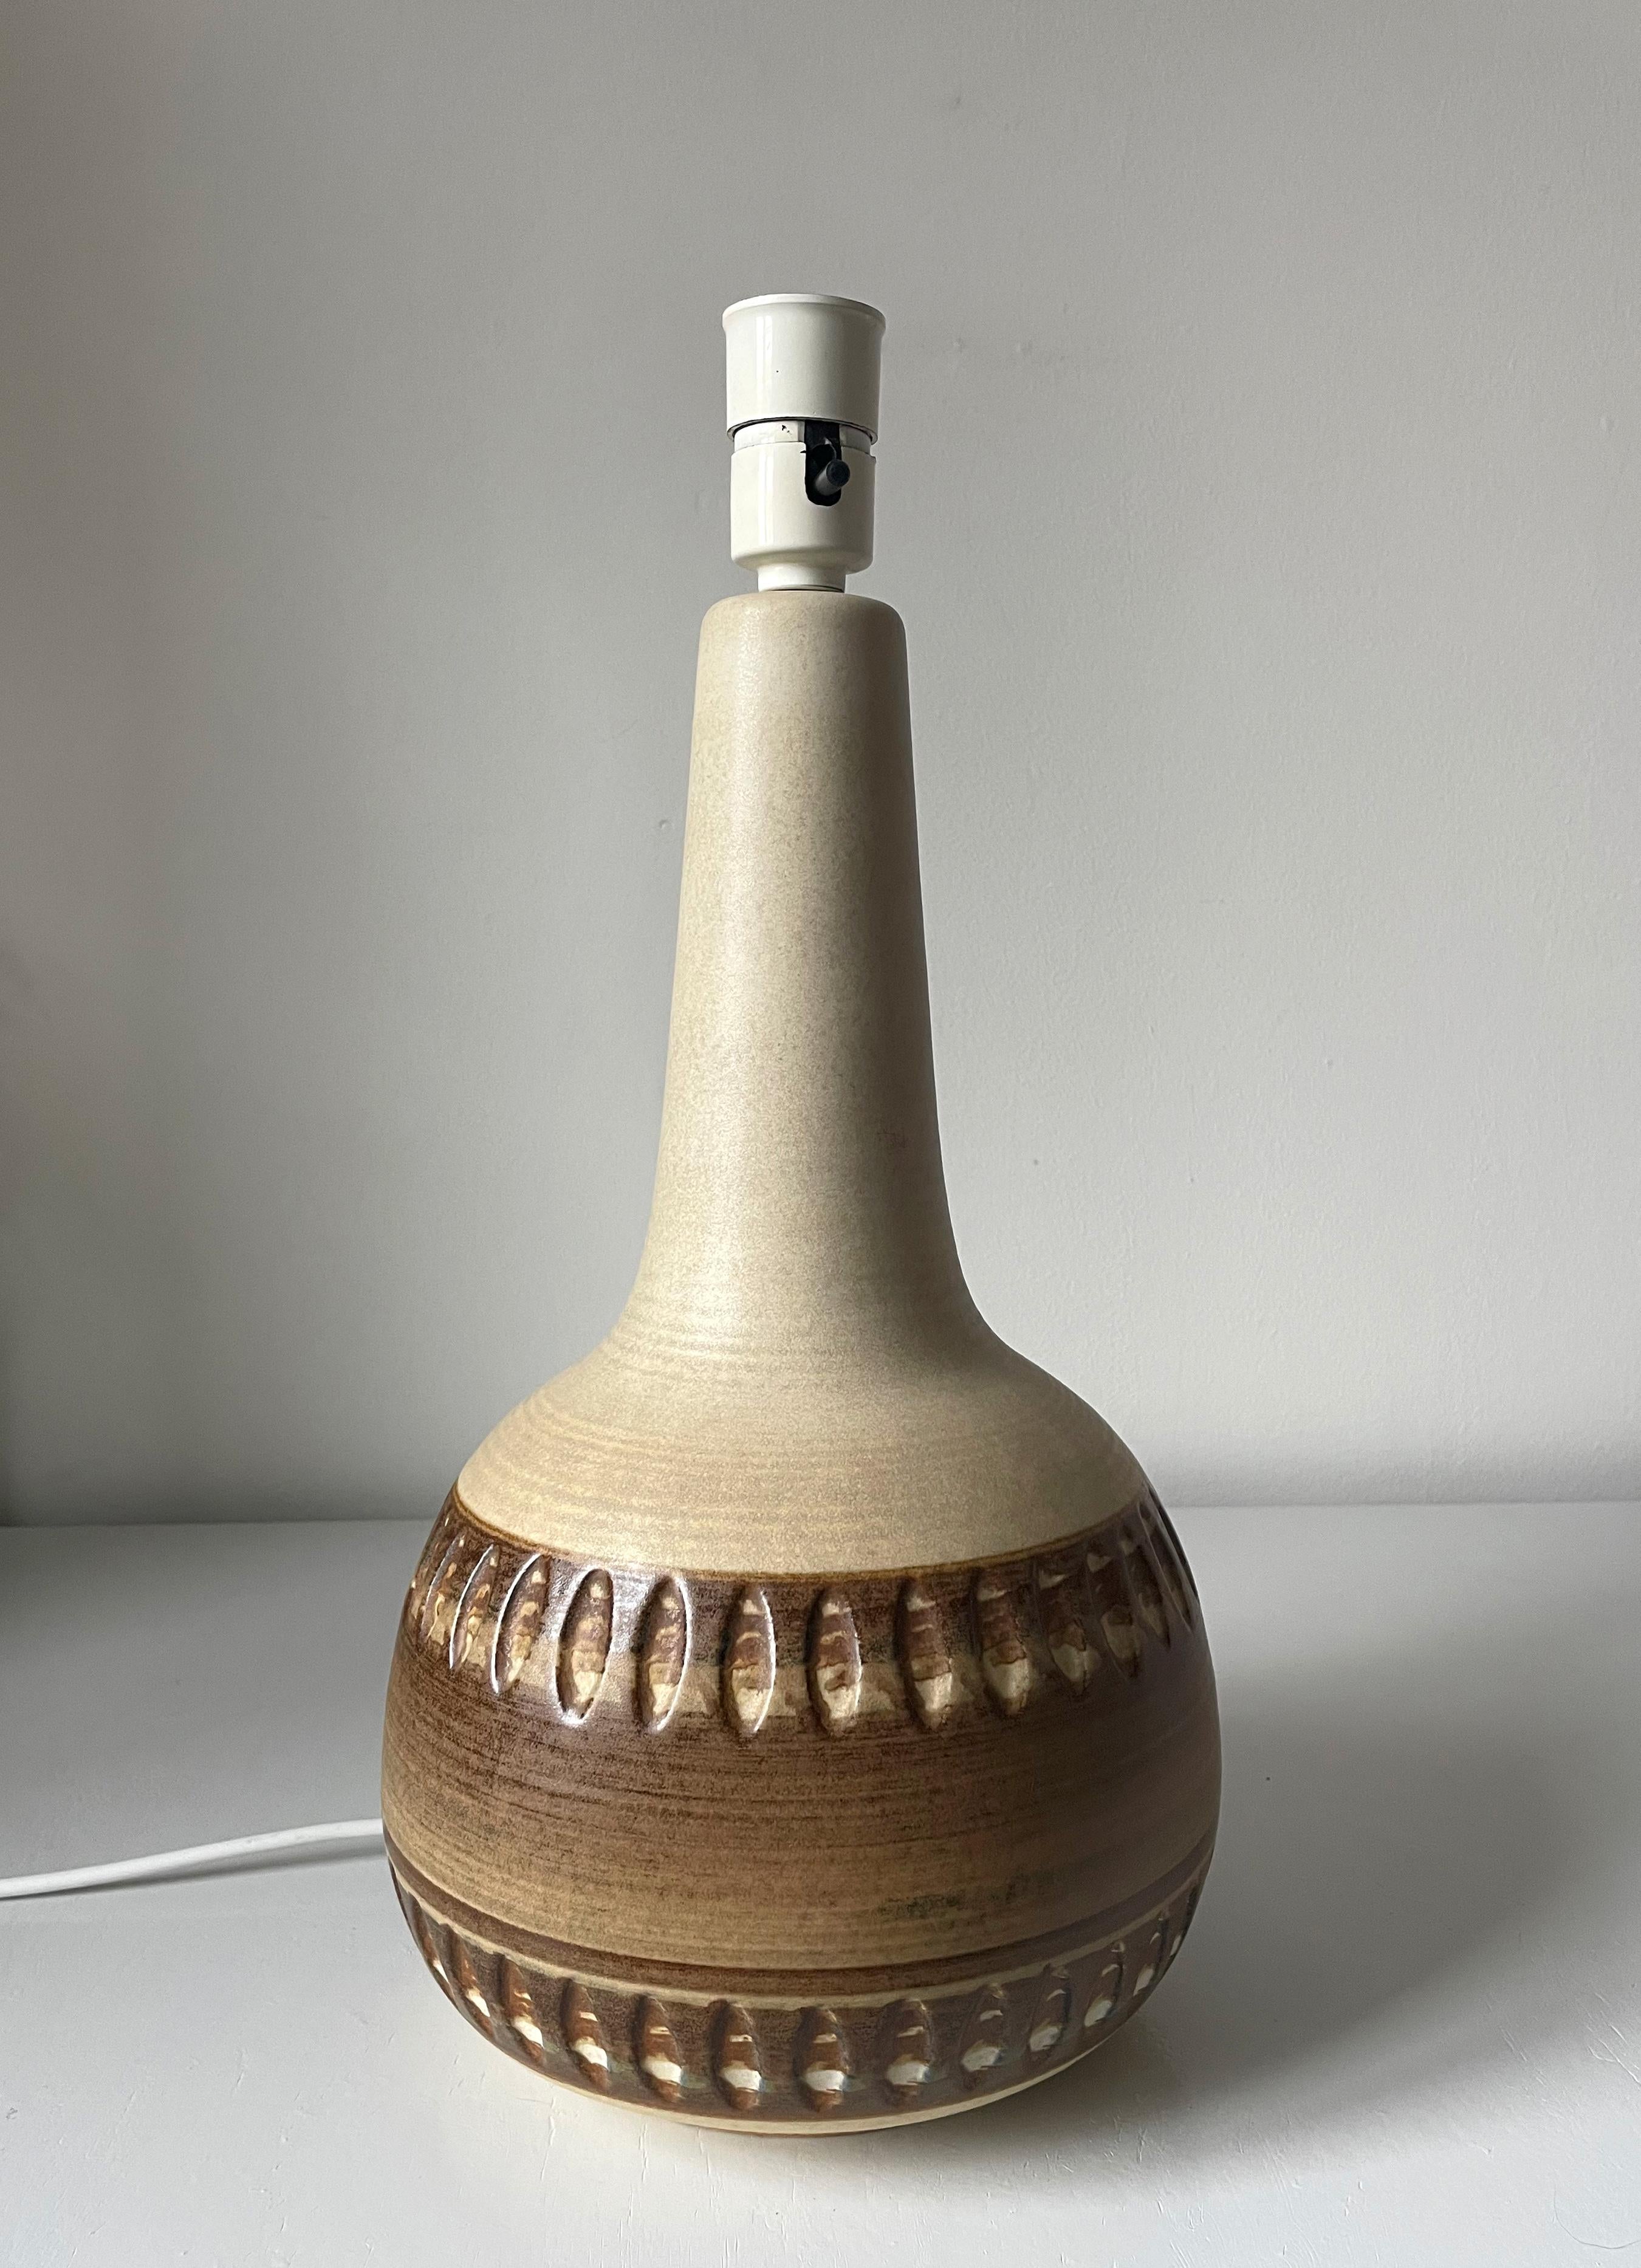 Glazed Tall 1960s Danish Modern Earth Toned Stoneware Søholm Lamp For Sale